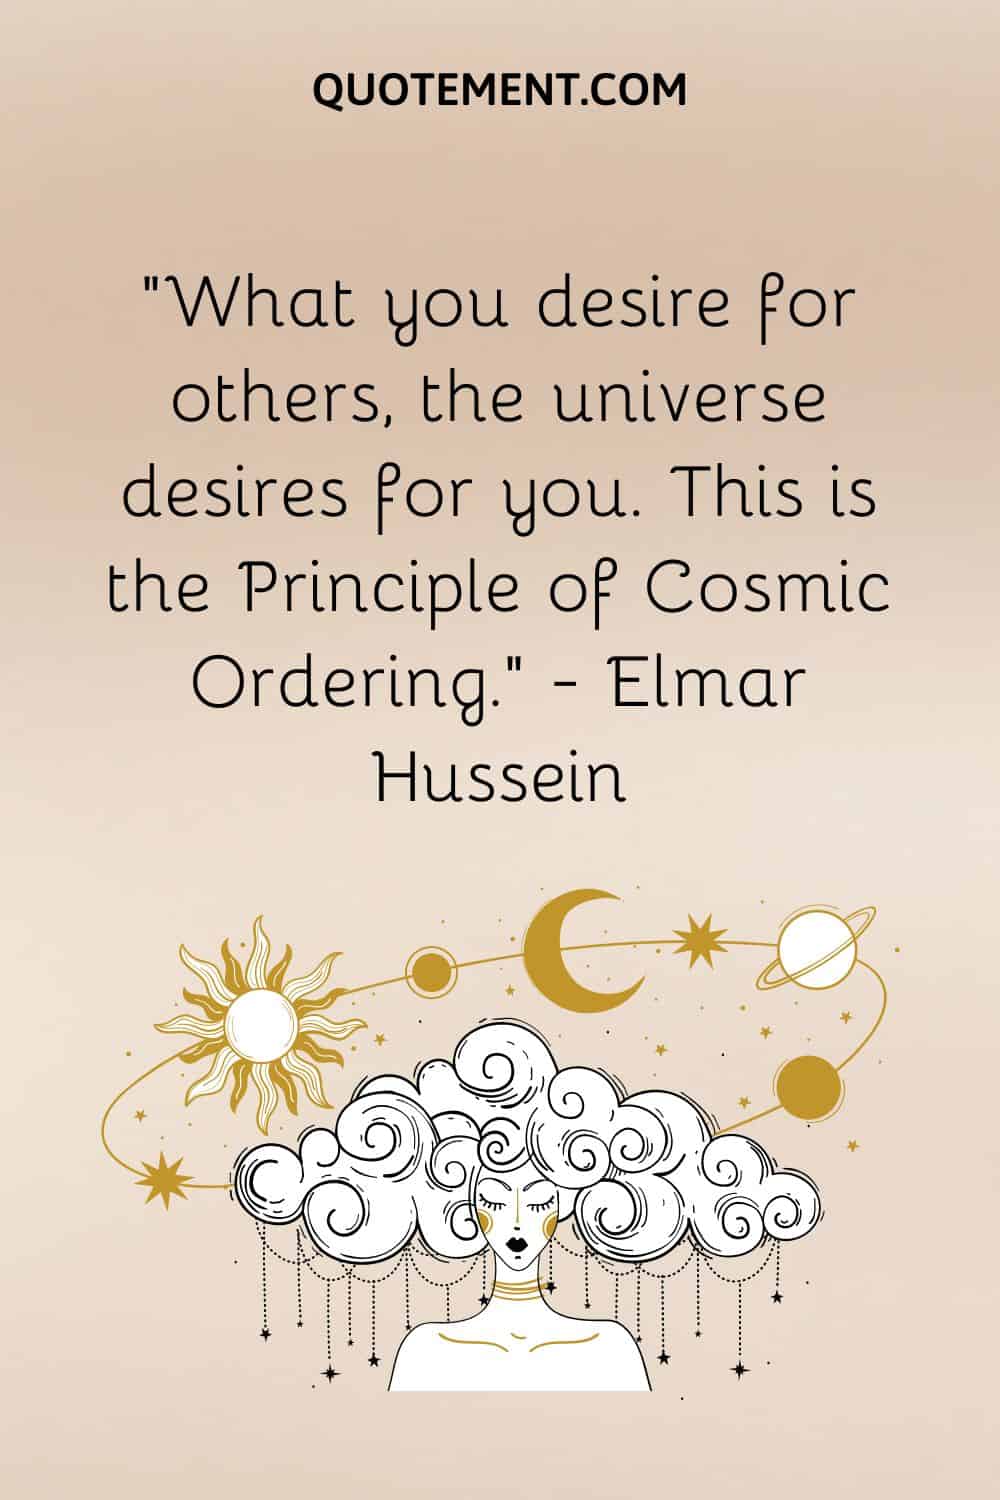 What you desire for others, the universe desires for you